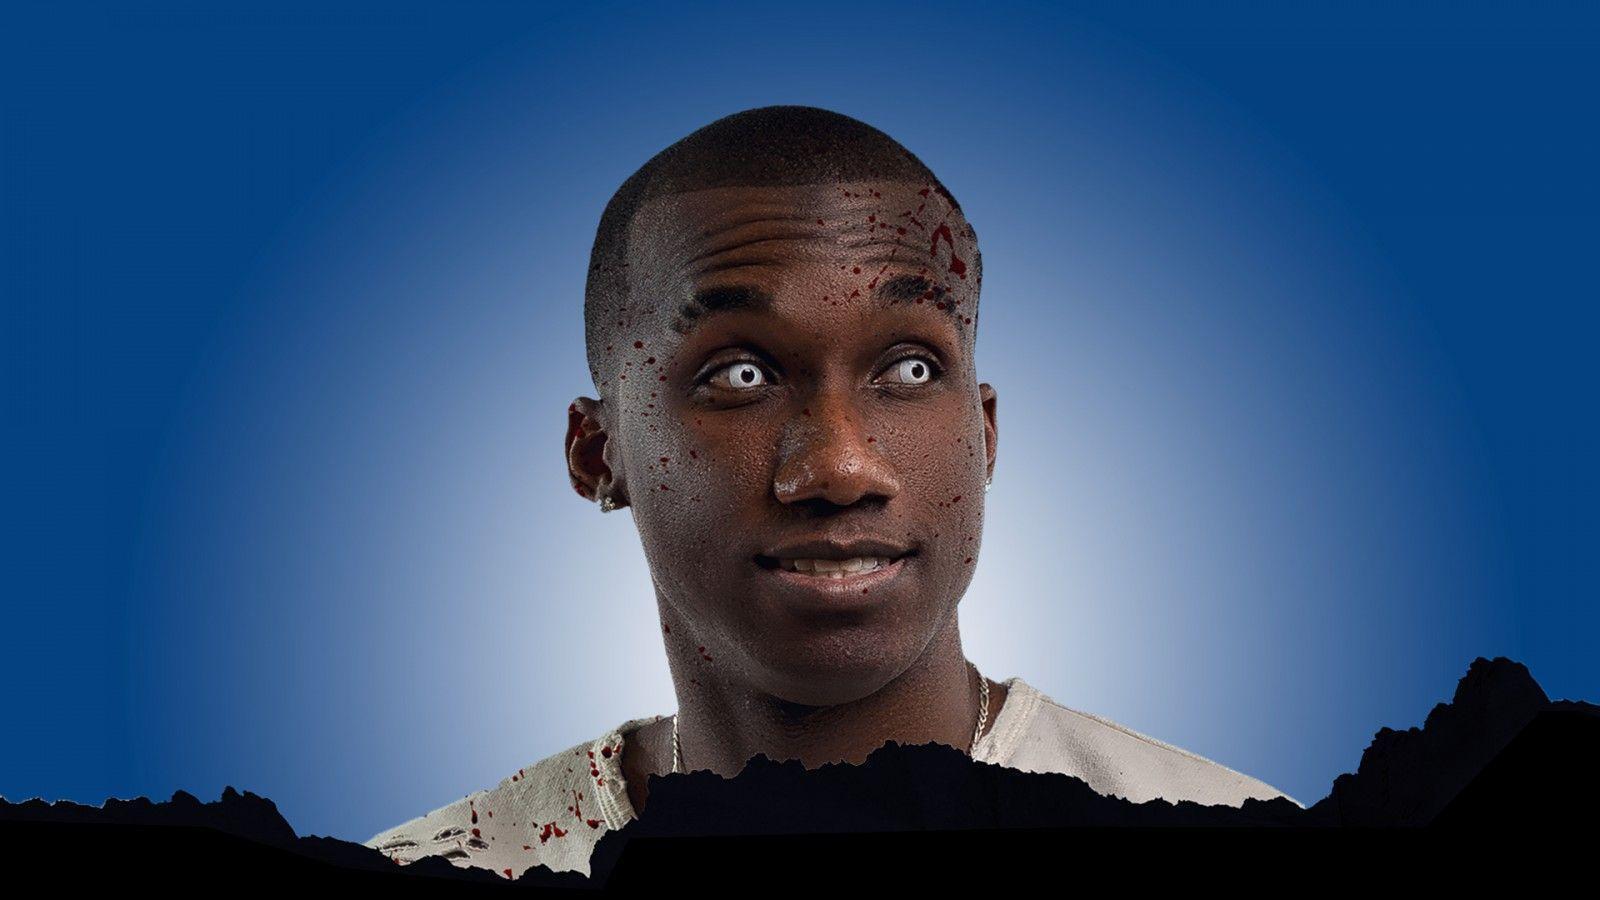 Here's What It's Like To See Hopsin On His Savageville Tour